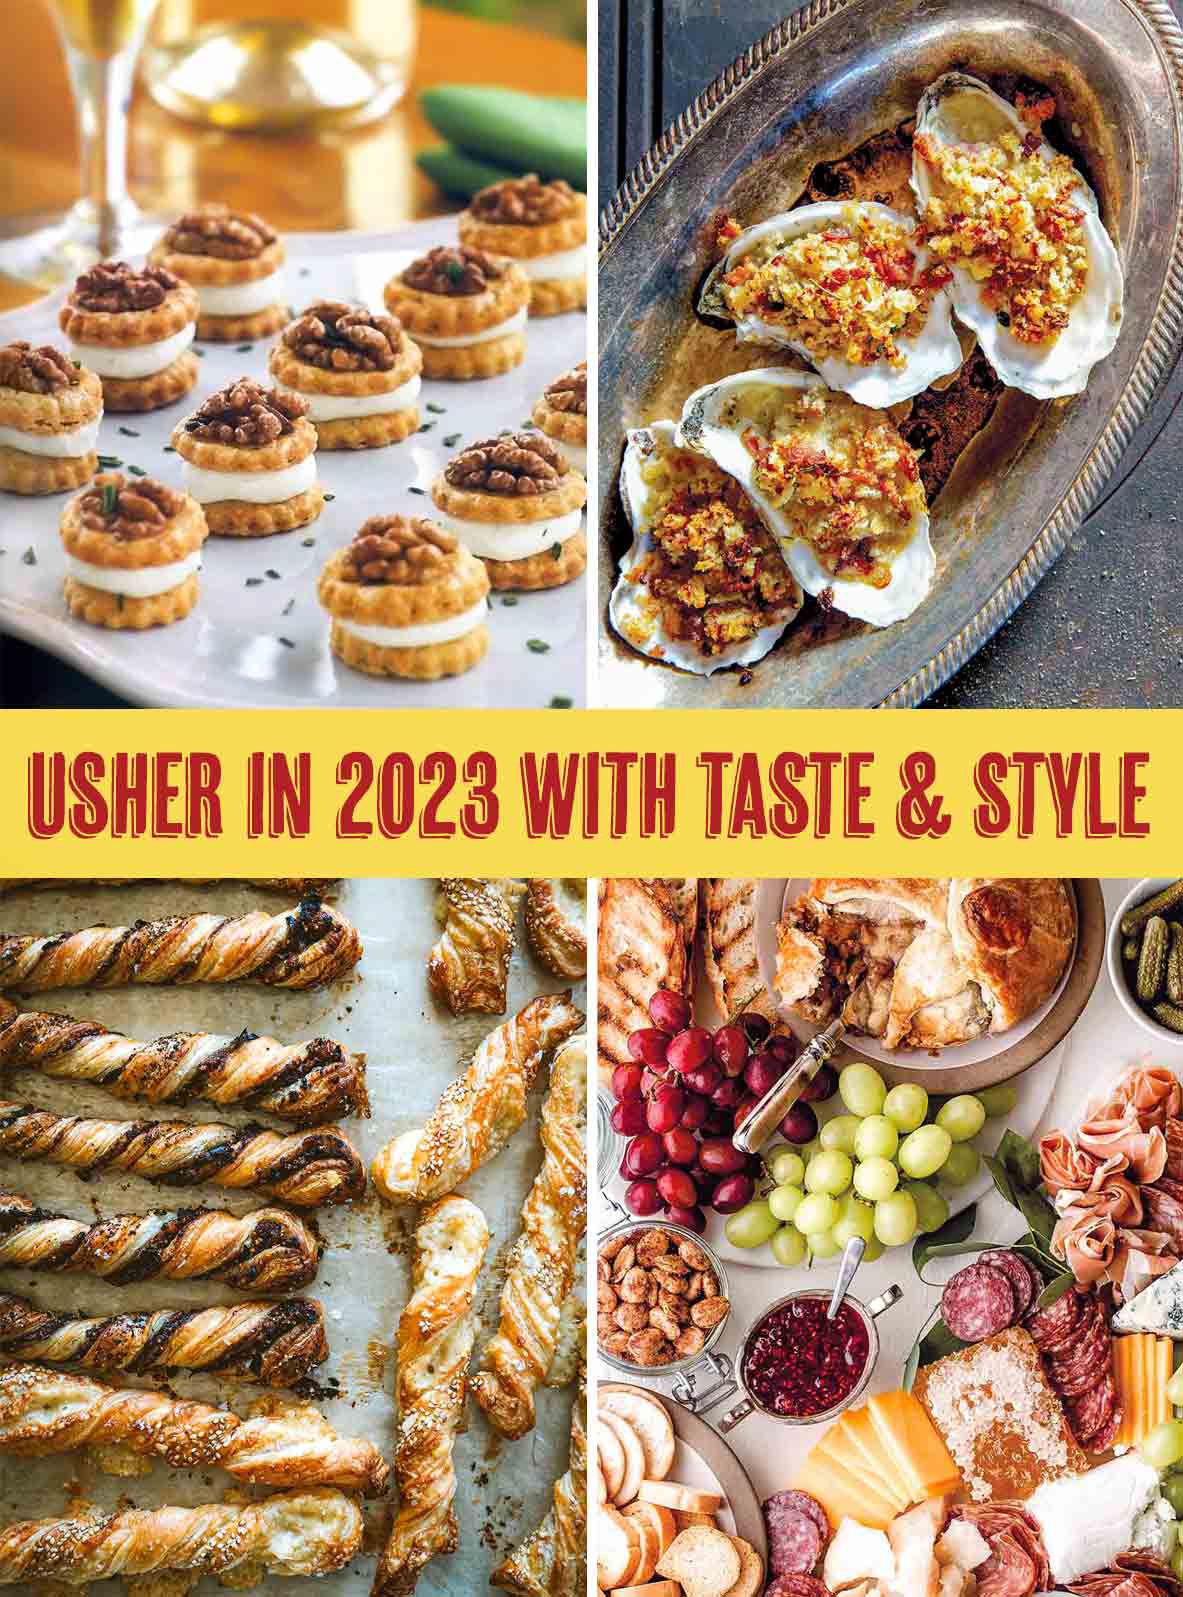 A collection of foods for nibbling, including shortbreads filled with cheese, a charcuterie board, pastry twists, and oysters.